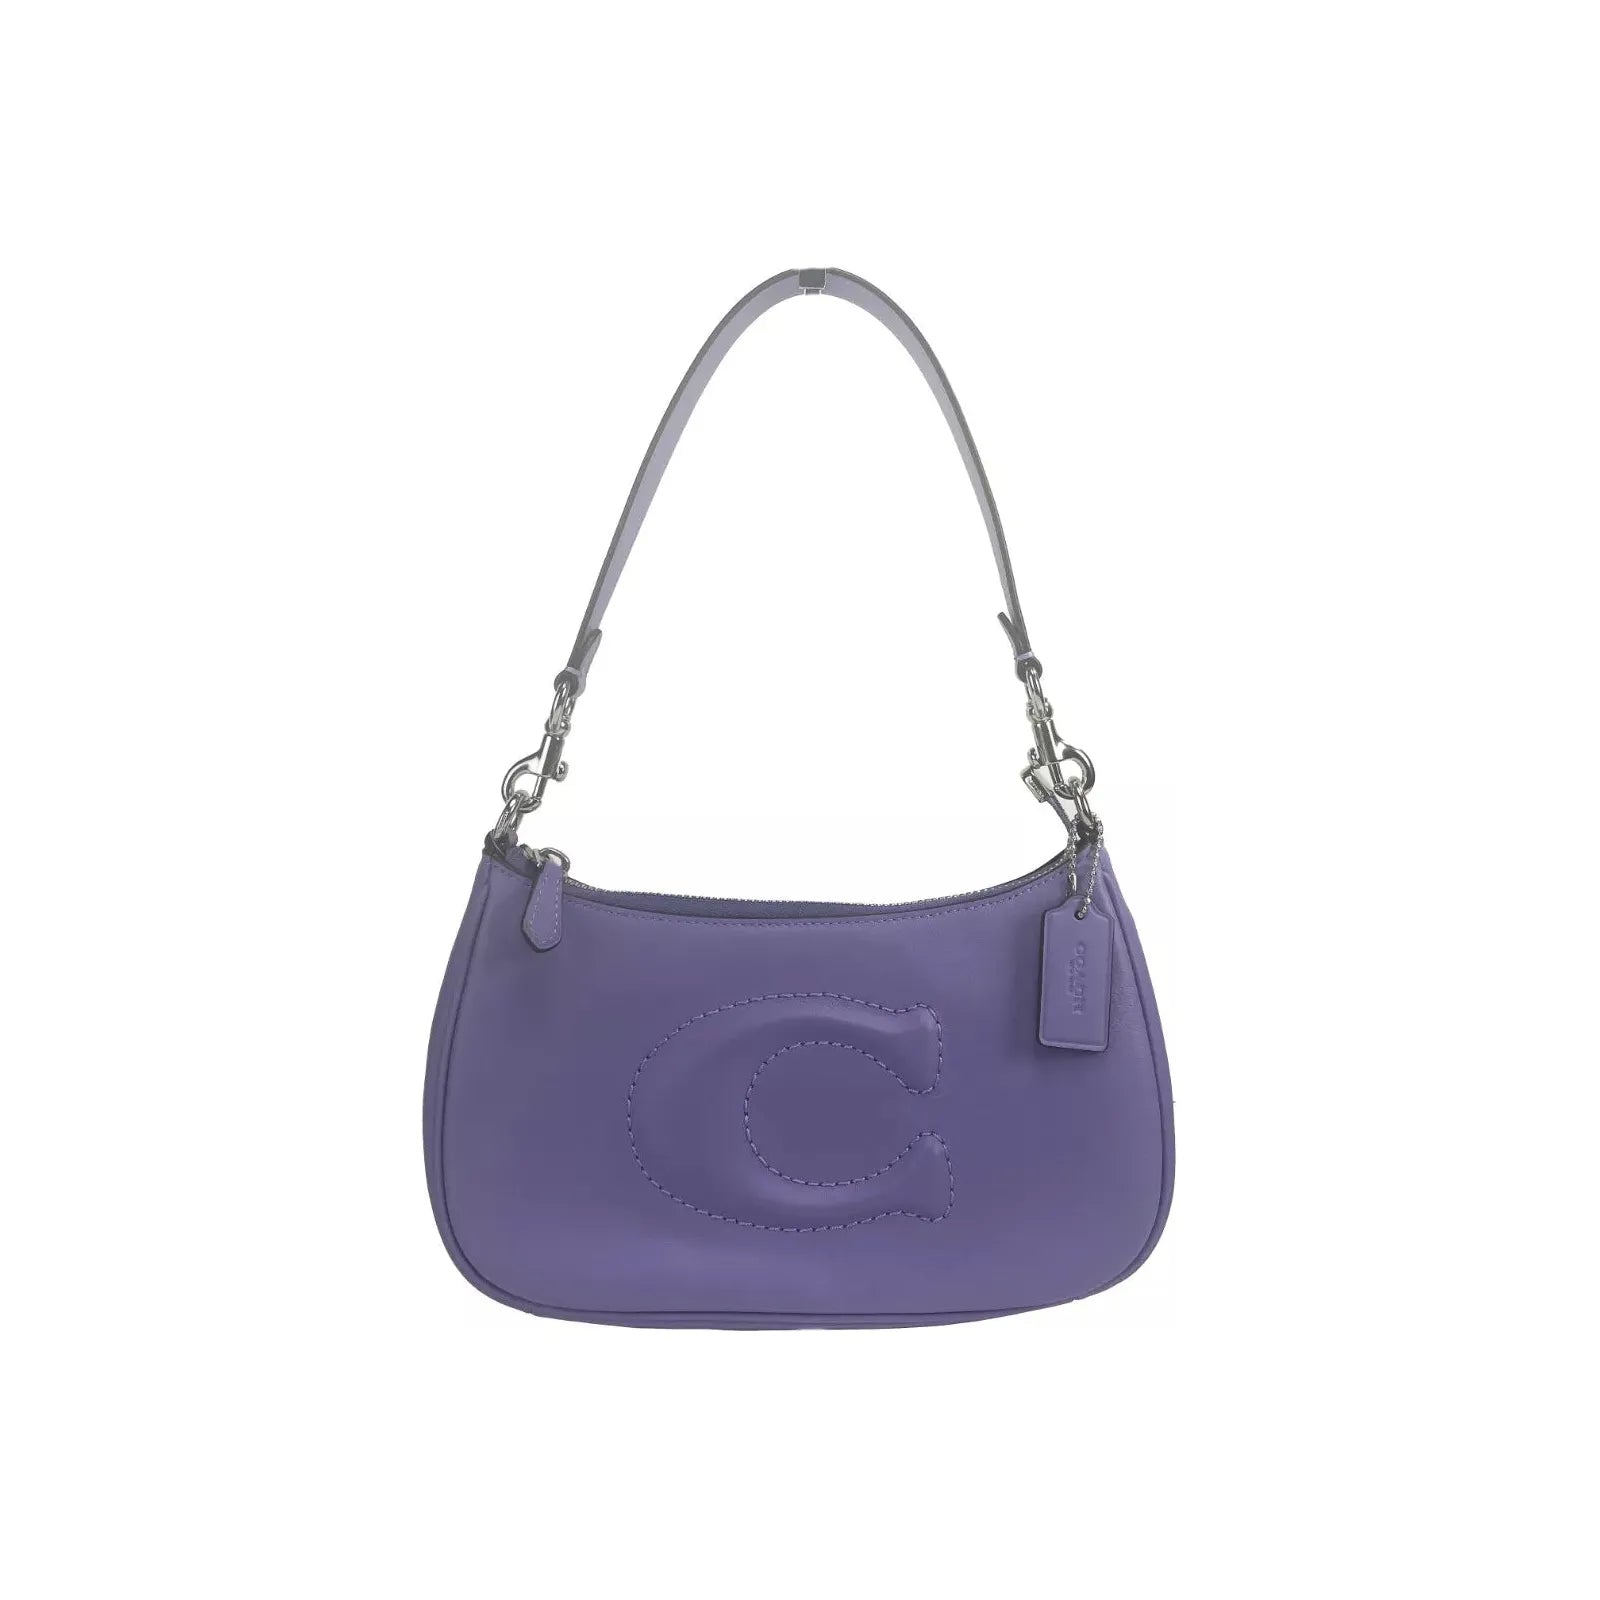 COACH Teri Smooth Leather Crossbody Bag Purse Purple - OBY BAGS